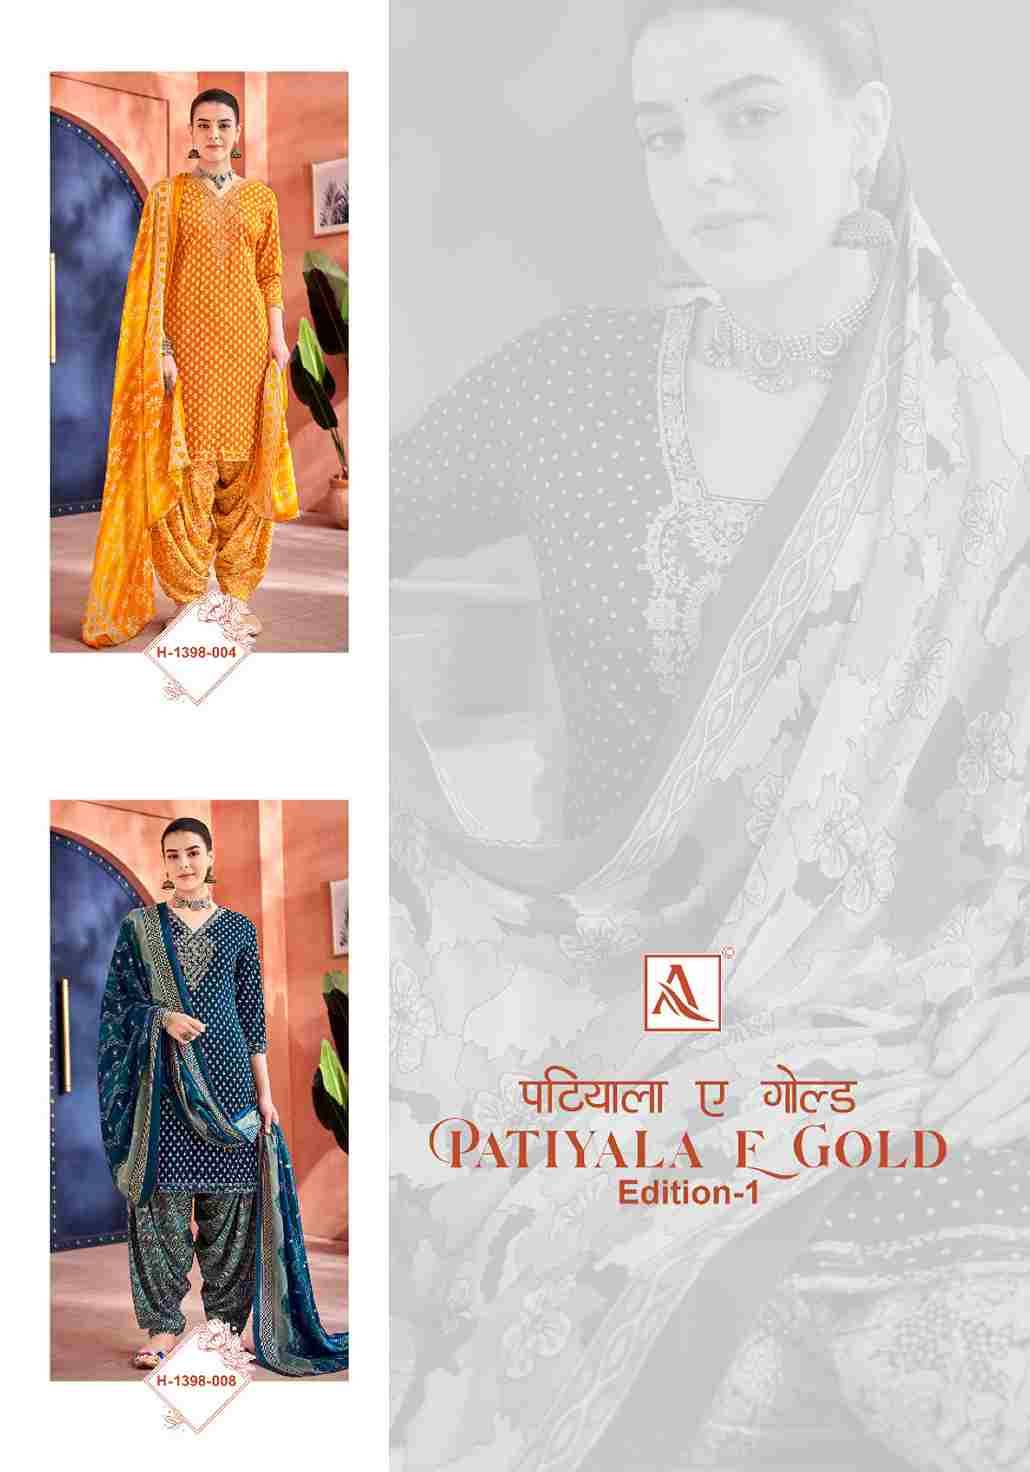 Patiala E Gold By Alok Suit 1398-001 To 1398-008 Series Beautiful Patiala Suits Colorful Stylish Fancy Casual Wear & Ethnic Wear Pure Viscose Rayon Dresses At Wholesale Price